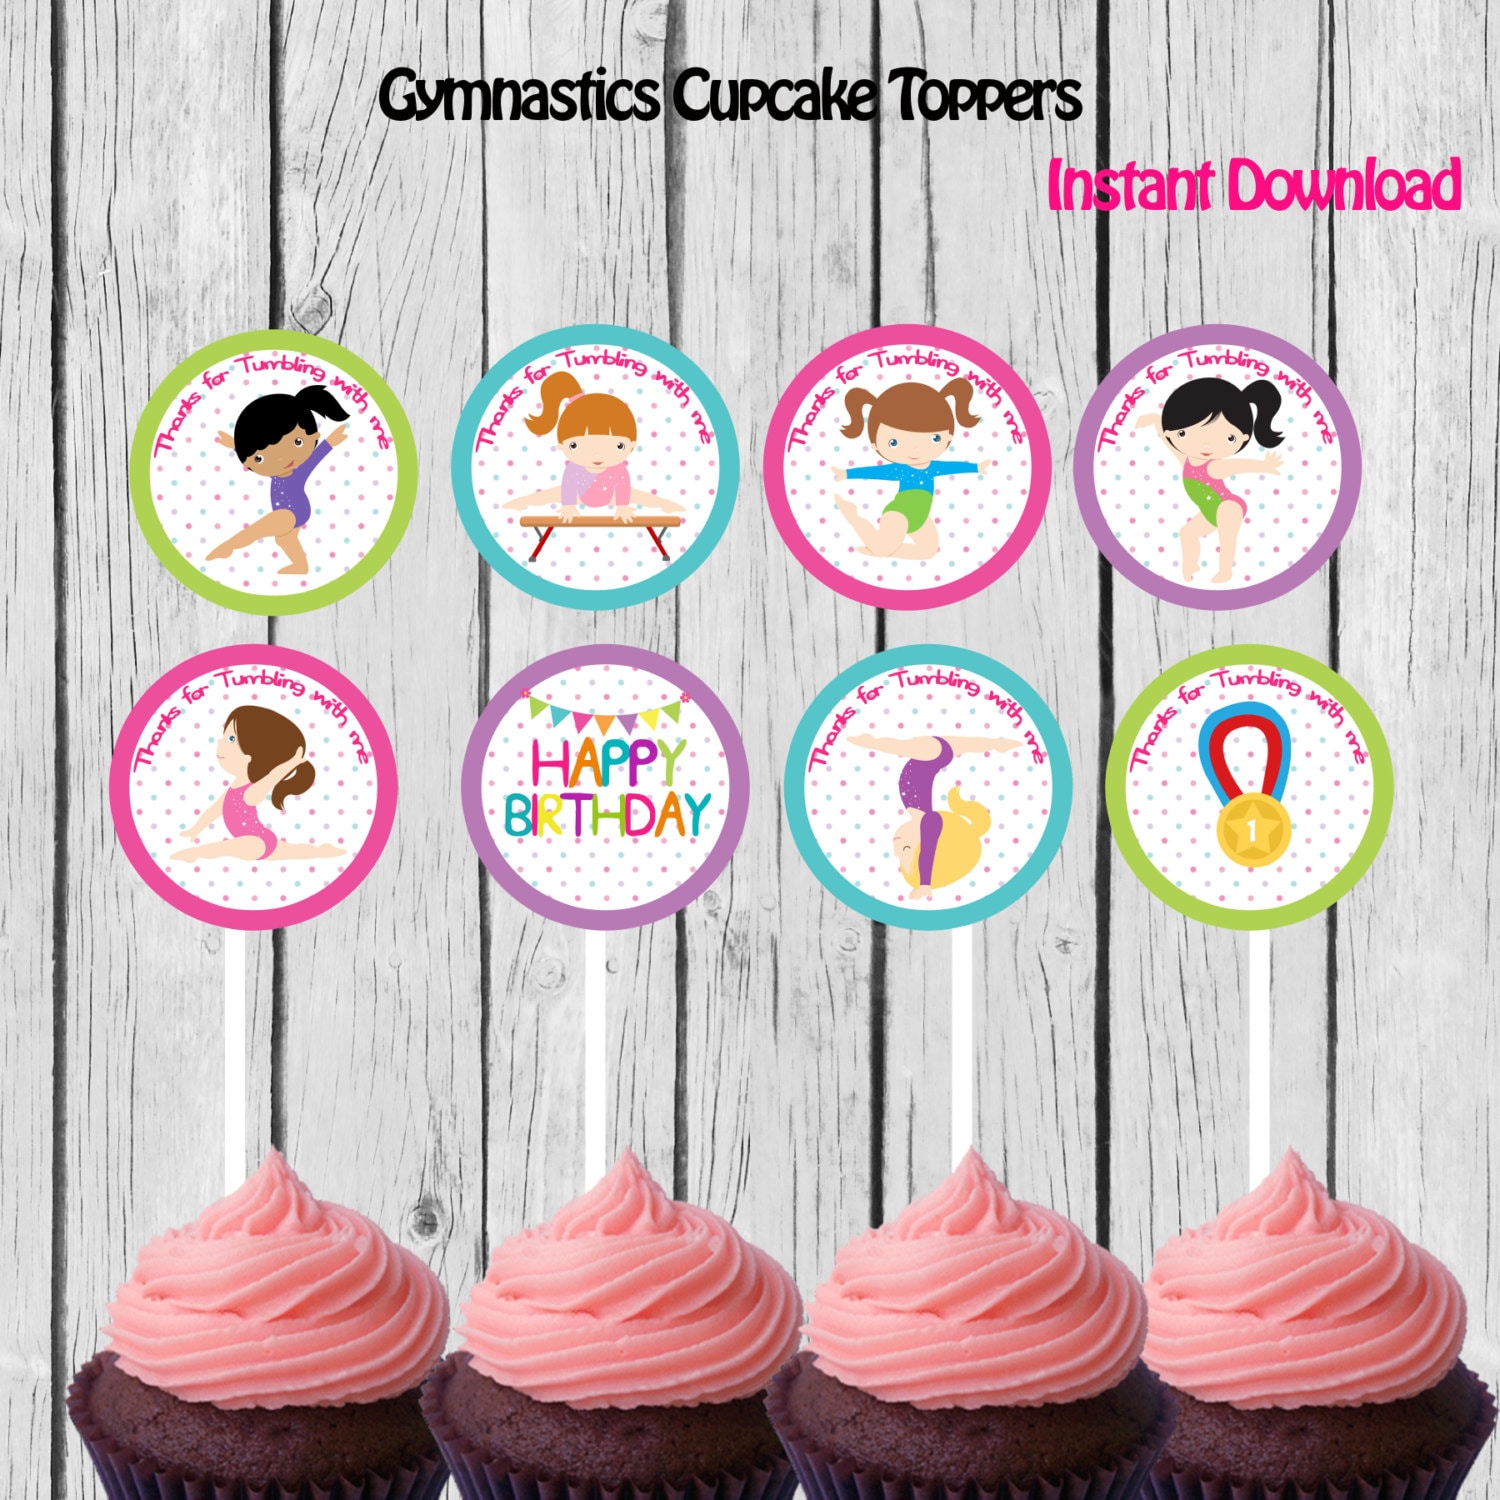 gymnastic-cupcake-toppers-gymnastic-stickers-gymnastic-party